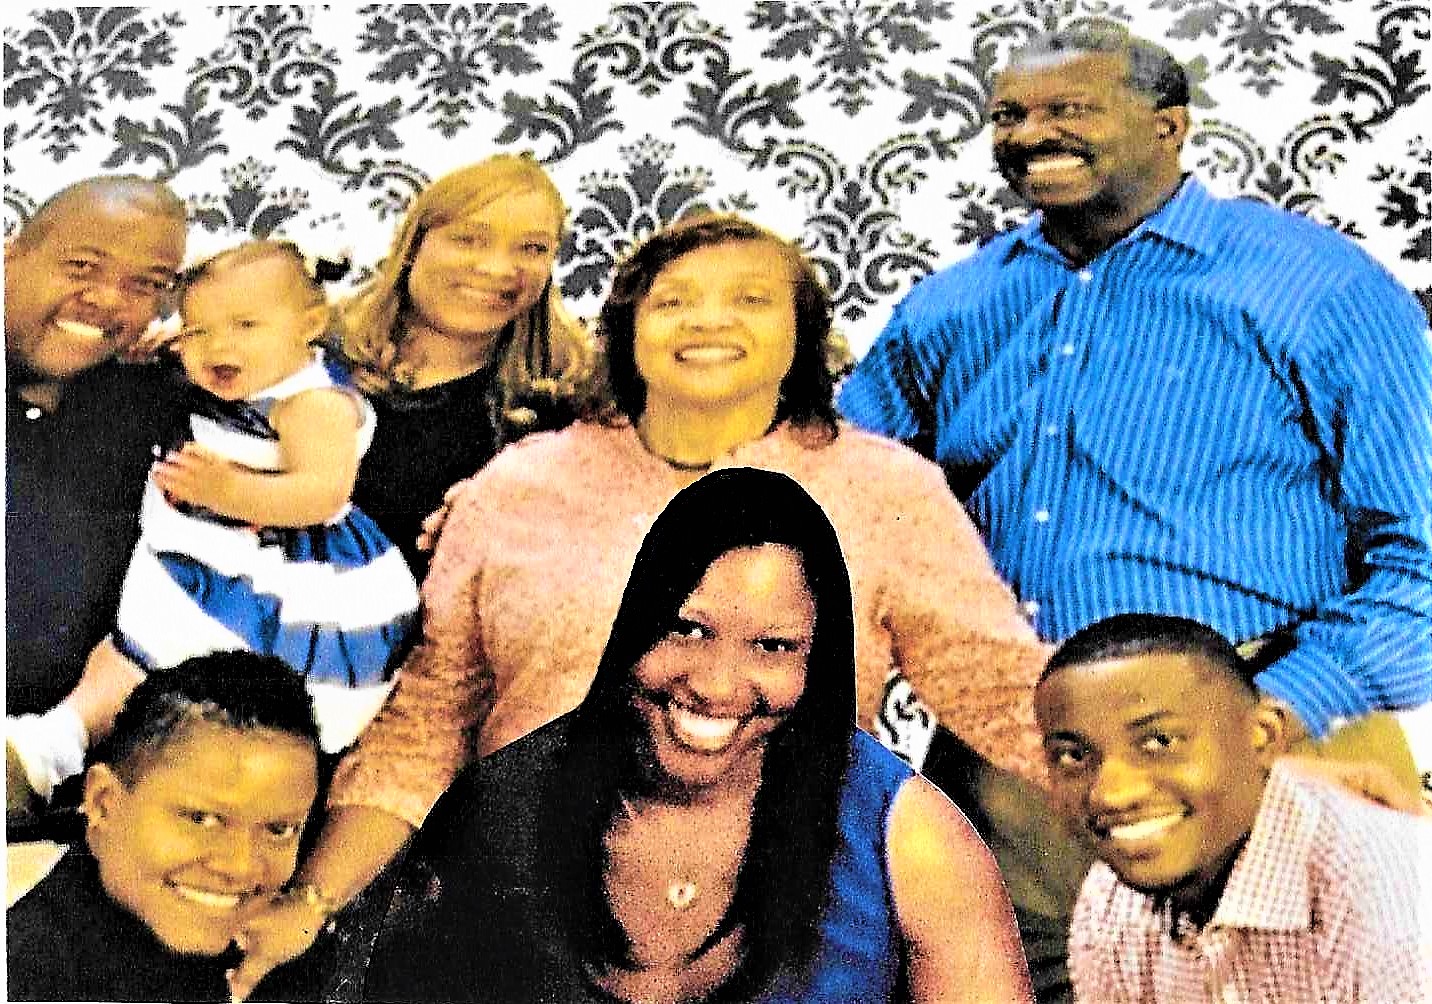 GARNER'S FAMILY with KIDS and GRANDS